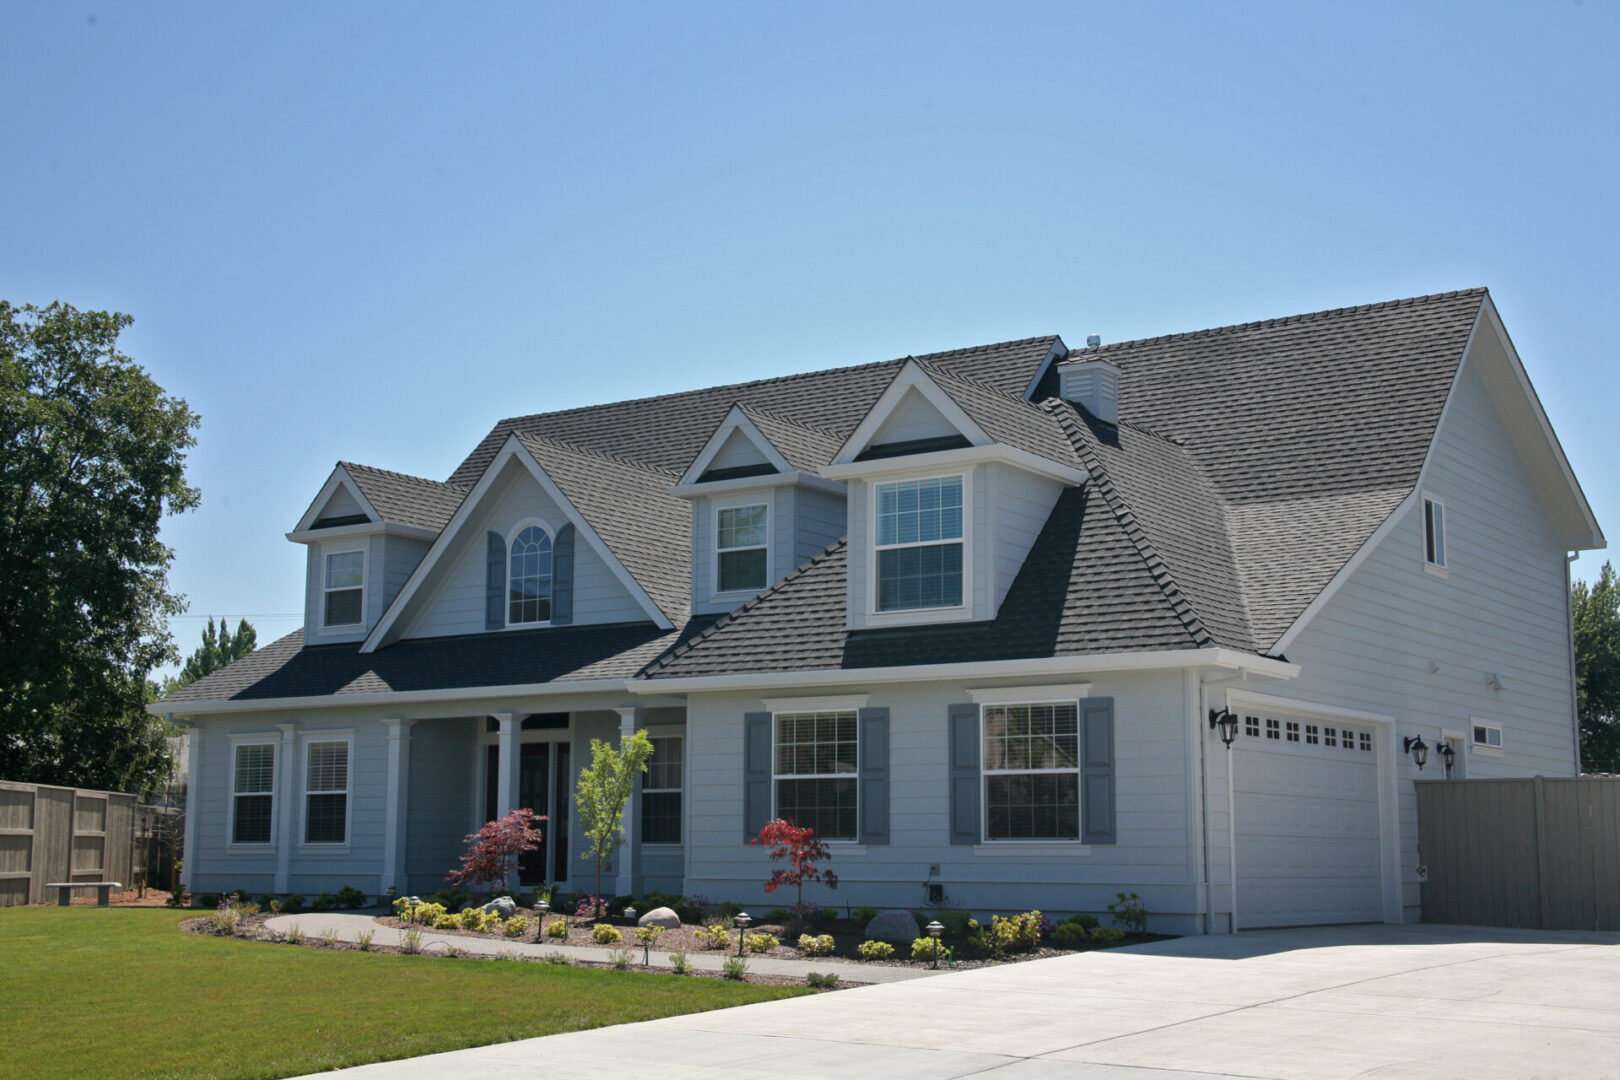 A home with a recently repaired residential roof